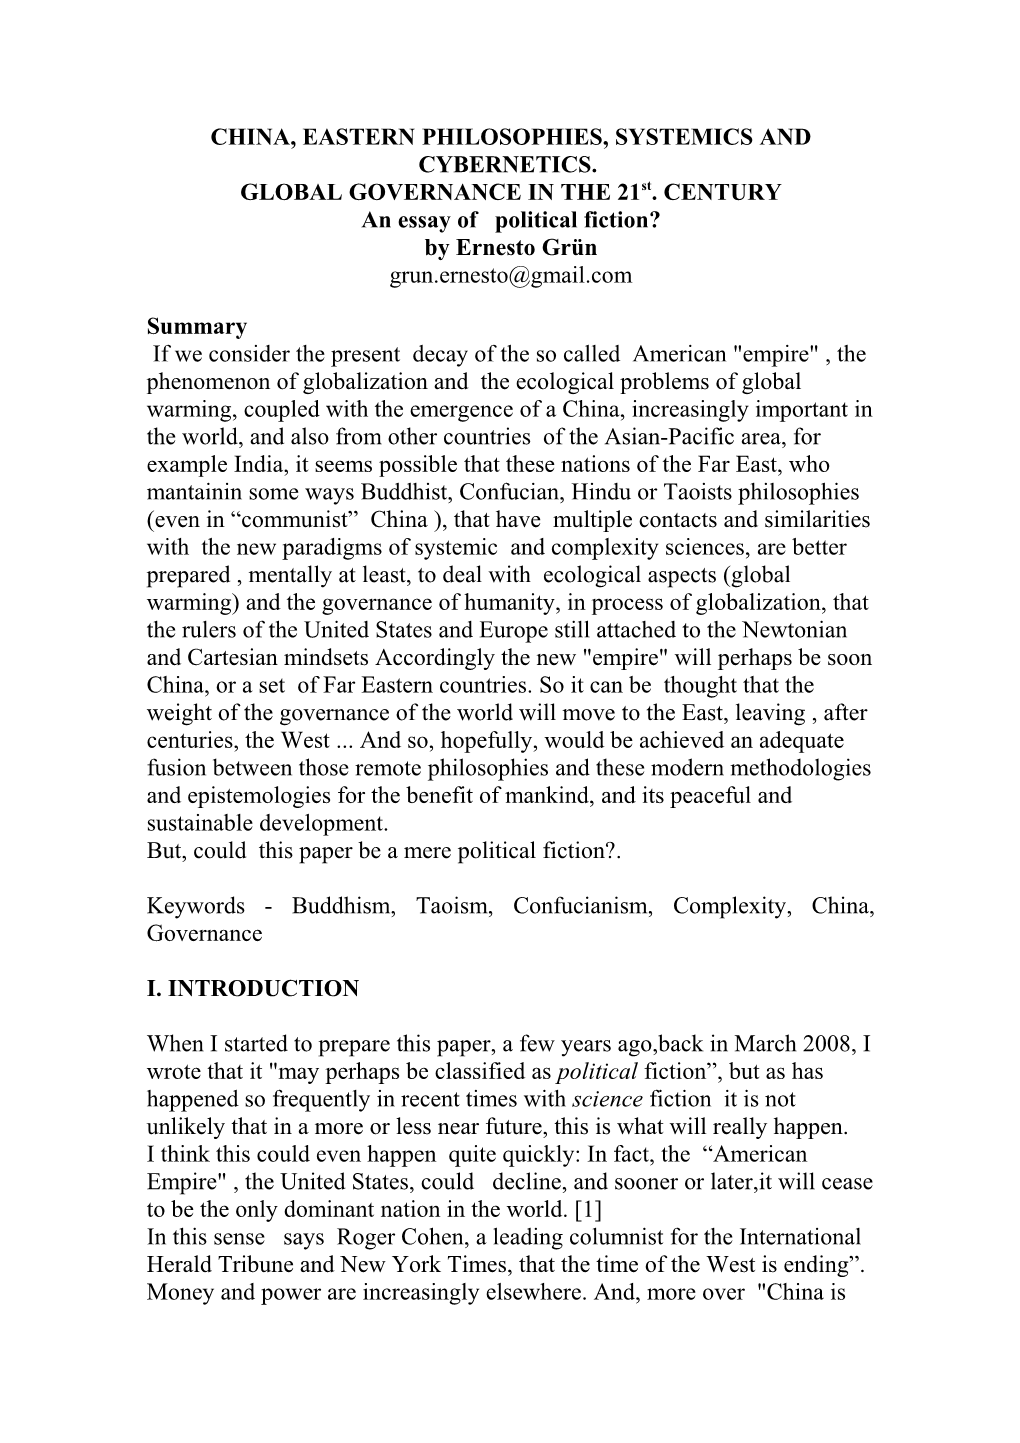 China, Eastern Philosophies, Systemics and Cybernetics